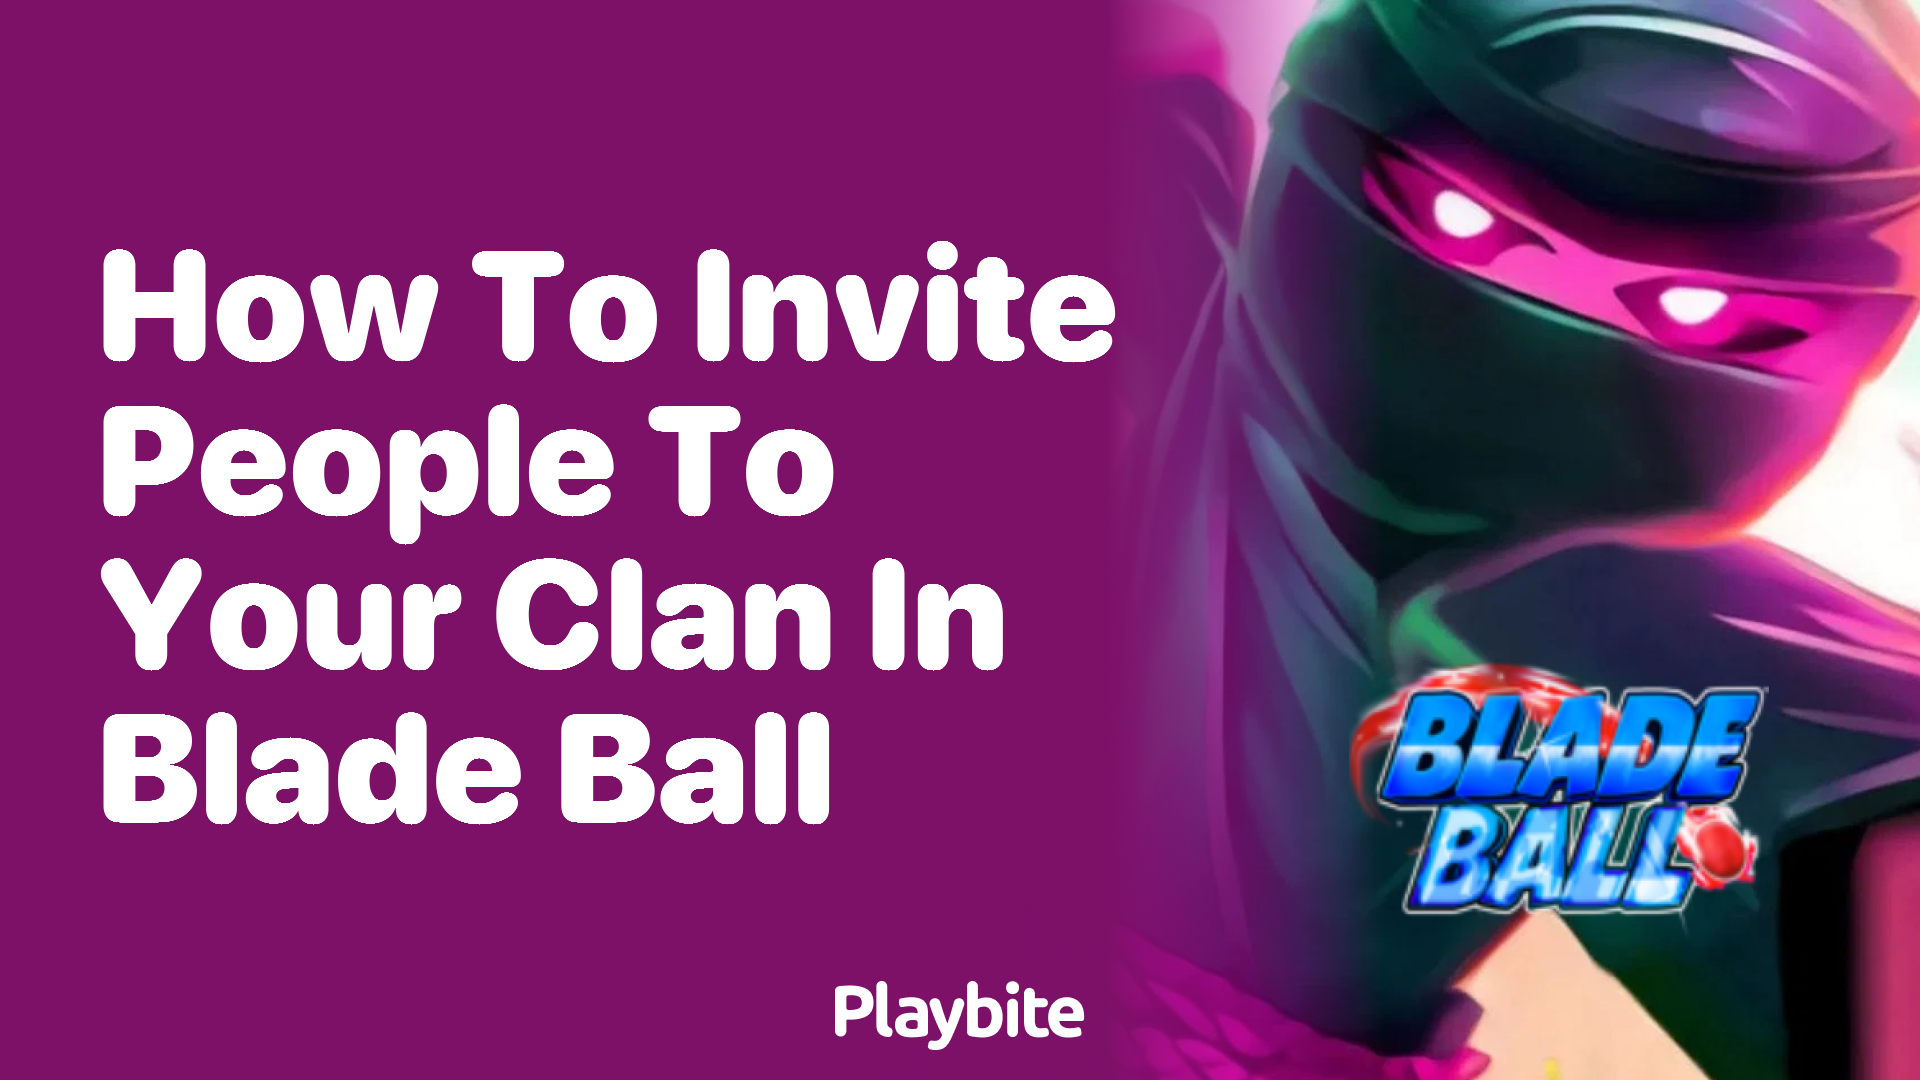 How to Invite People to Your Clan in Blade Ball